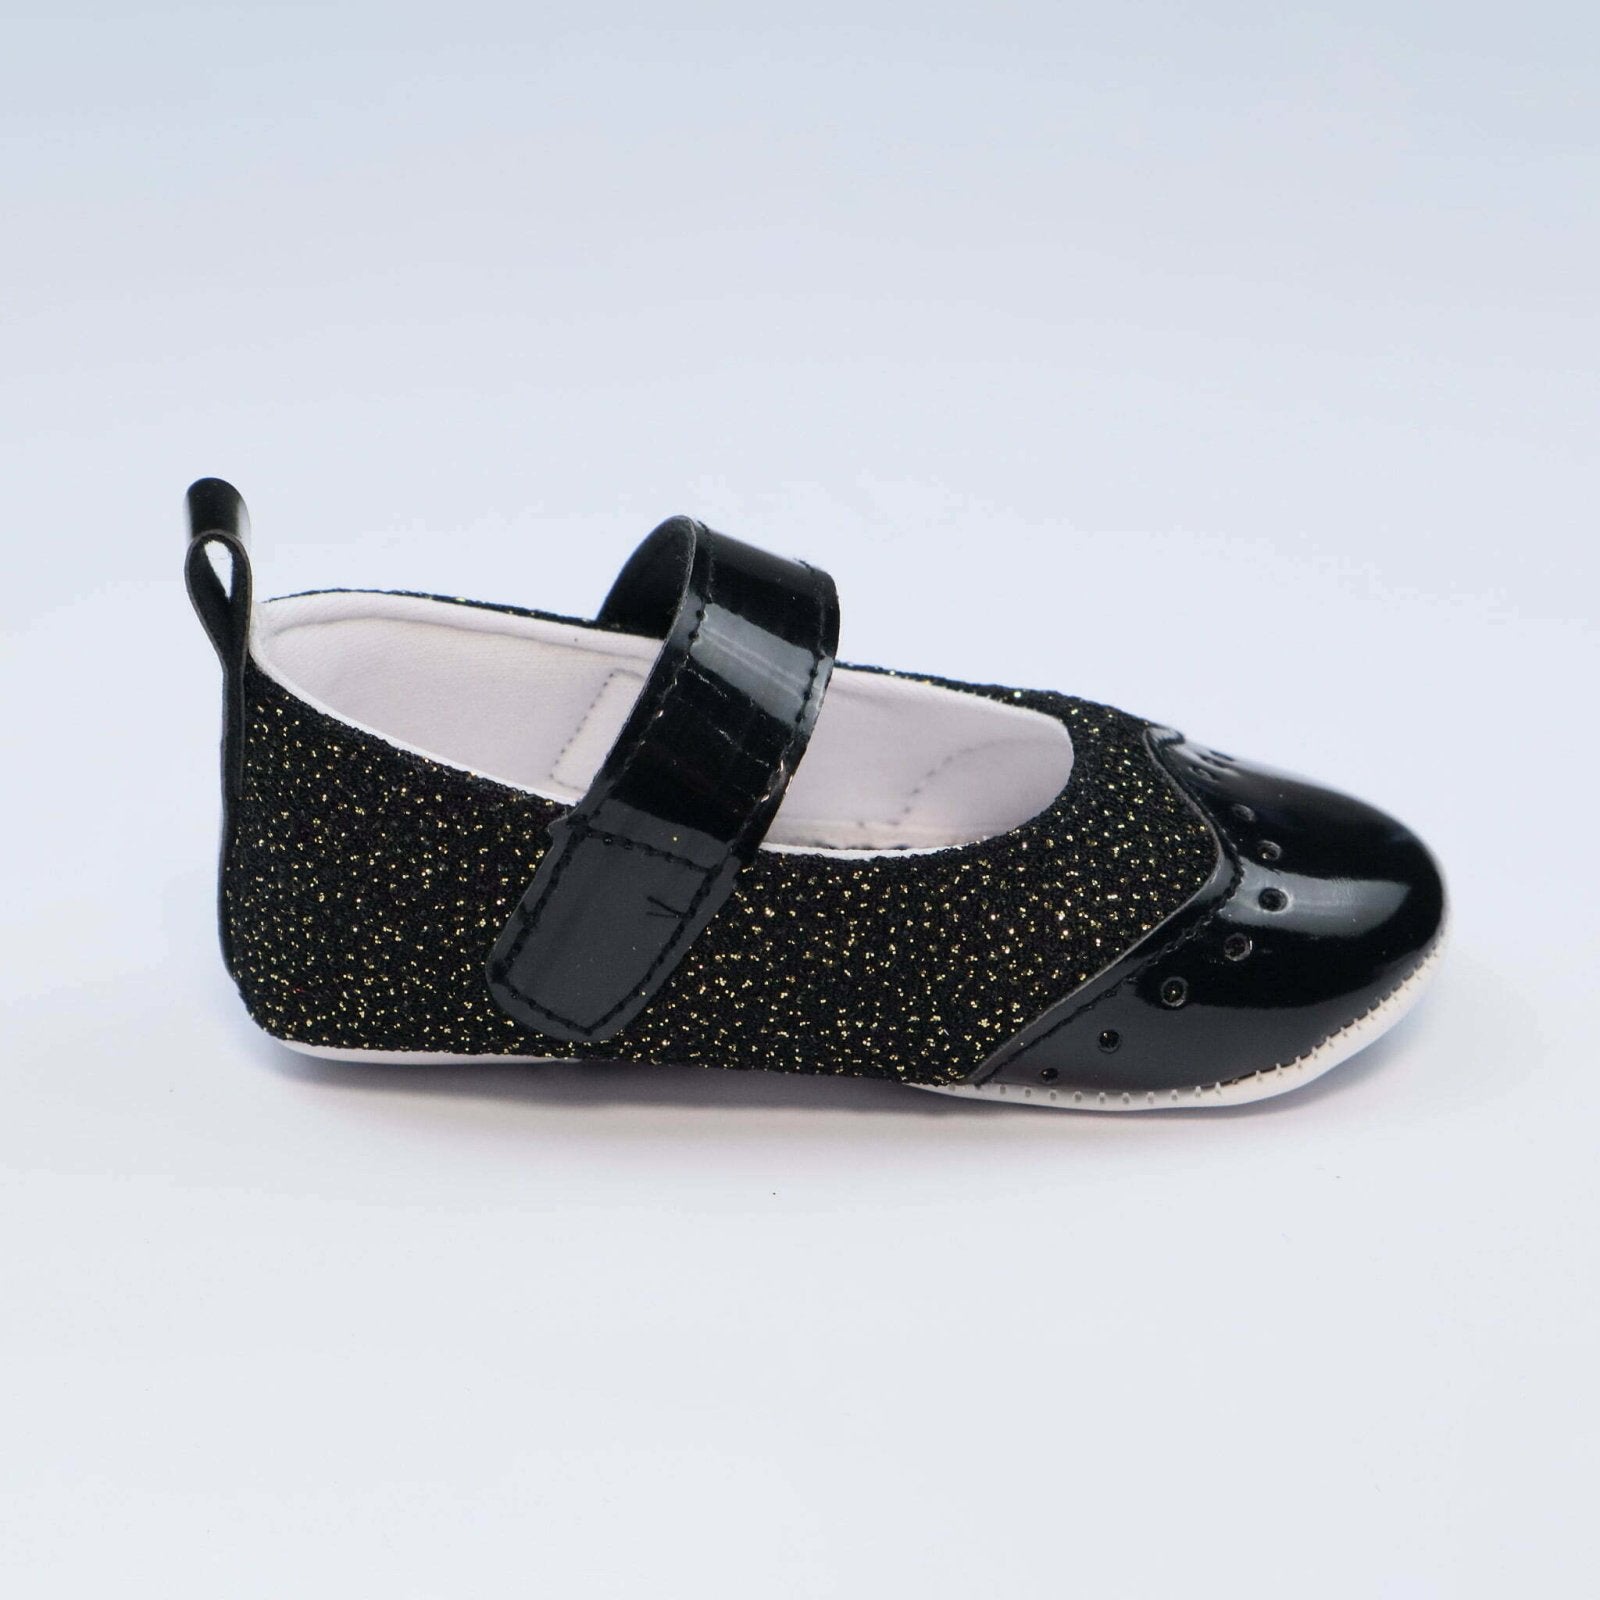 Baby Shoes Black Color With Glitter by Baby Pattini